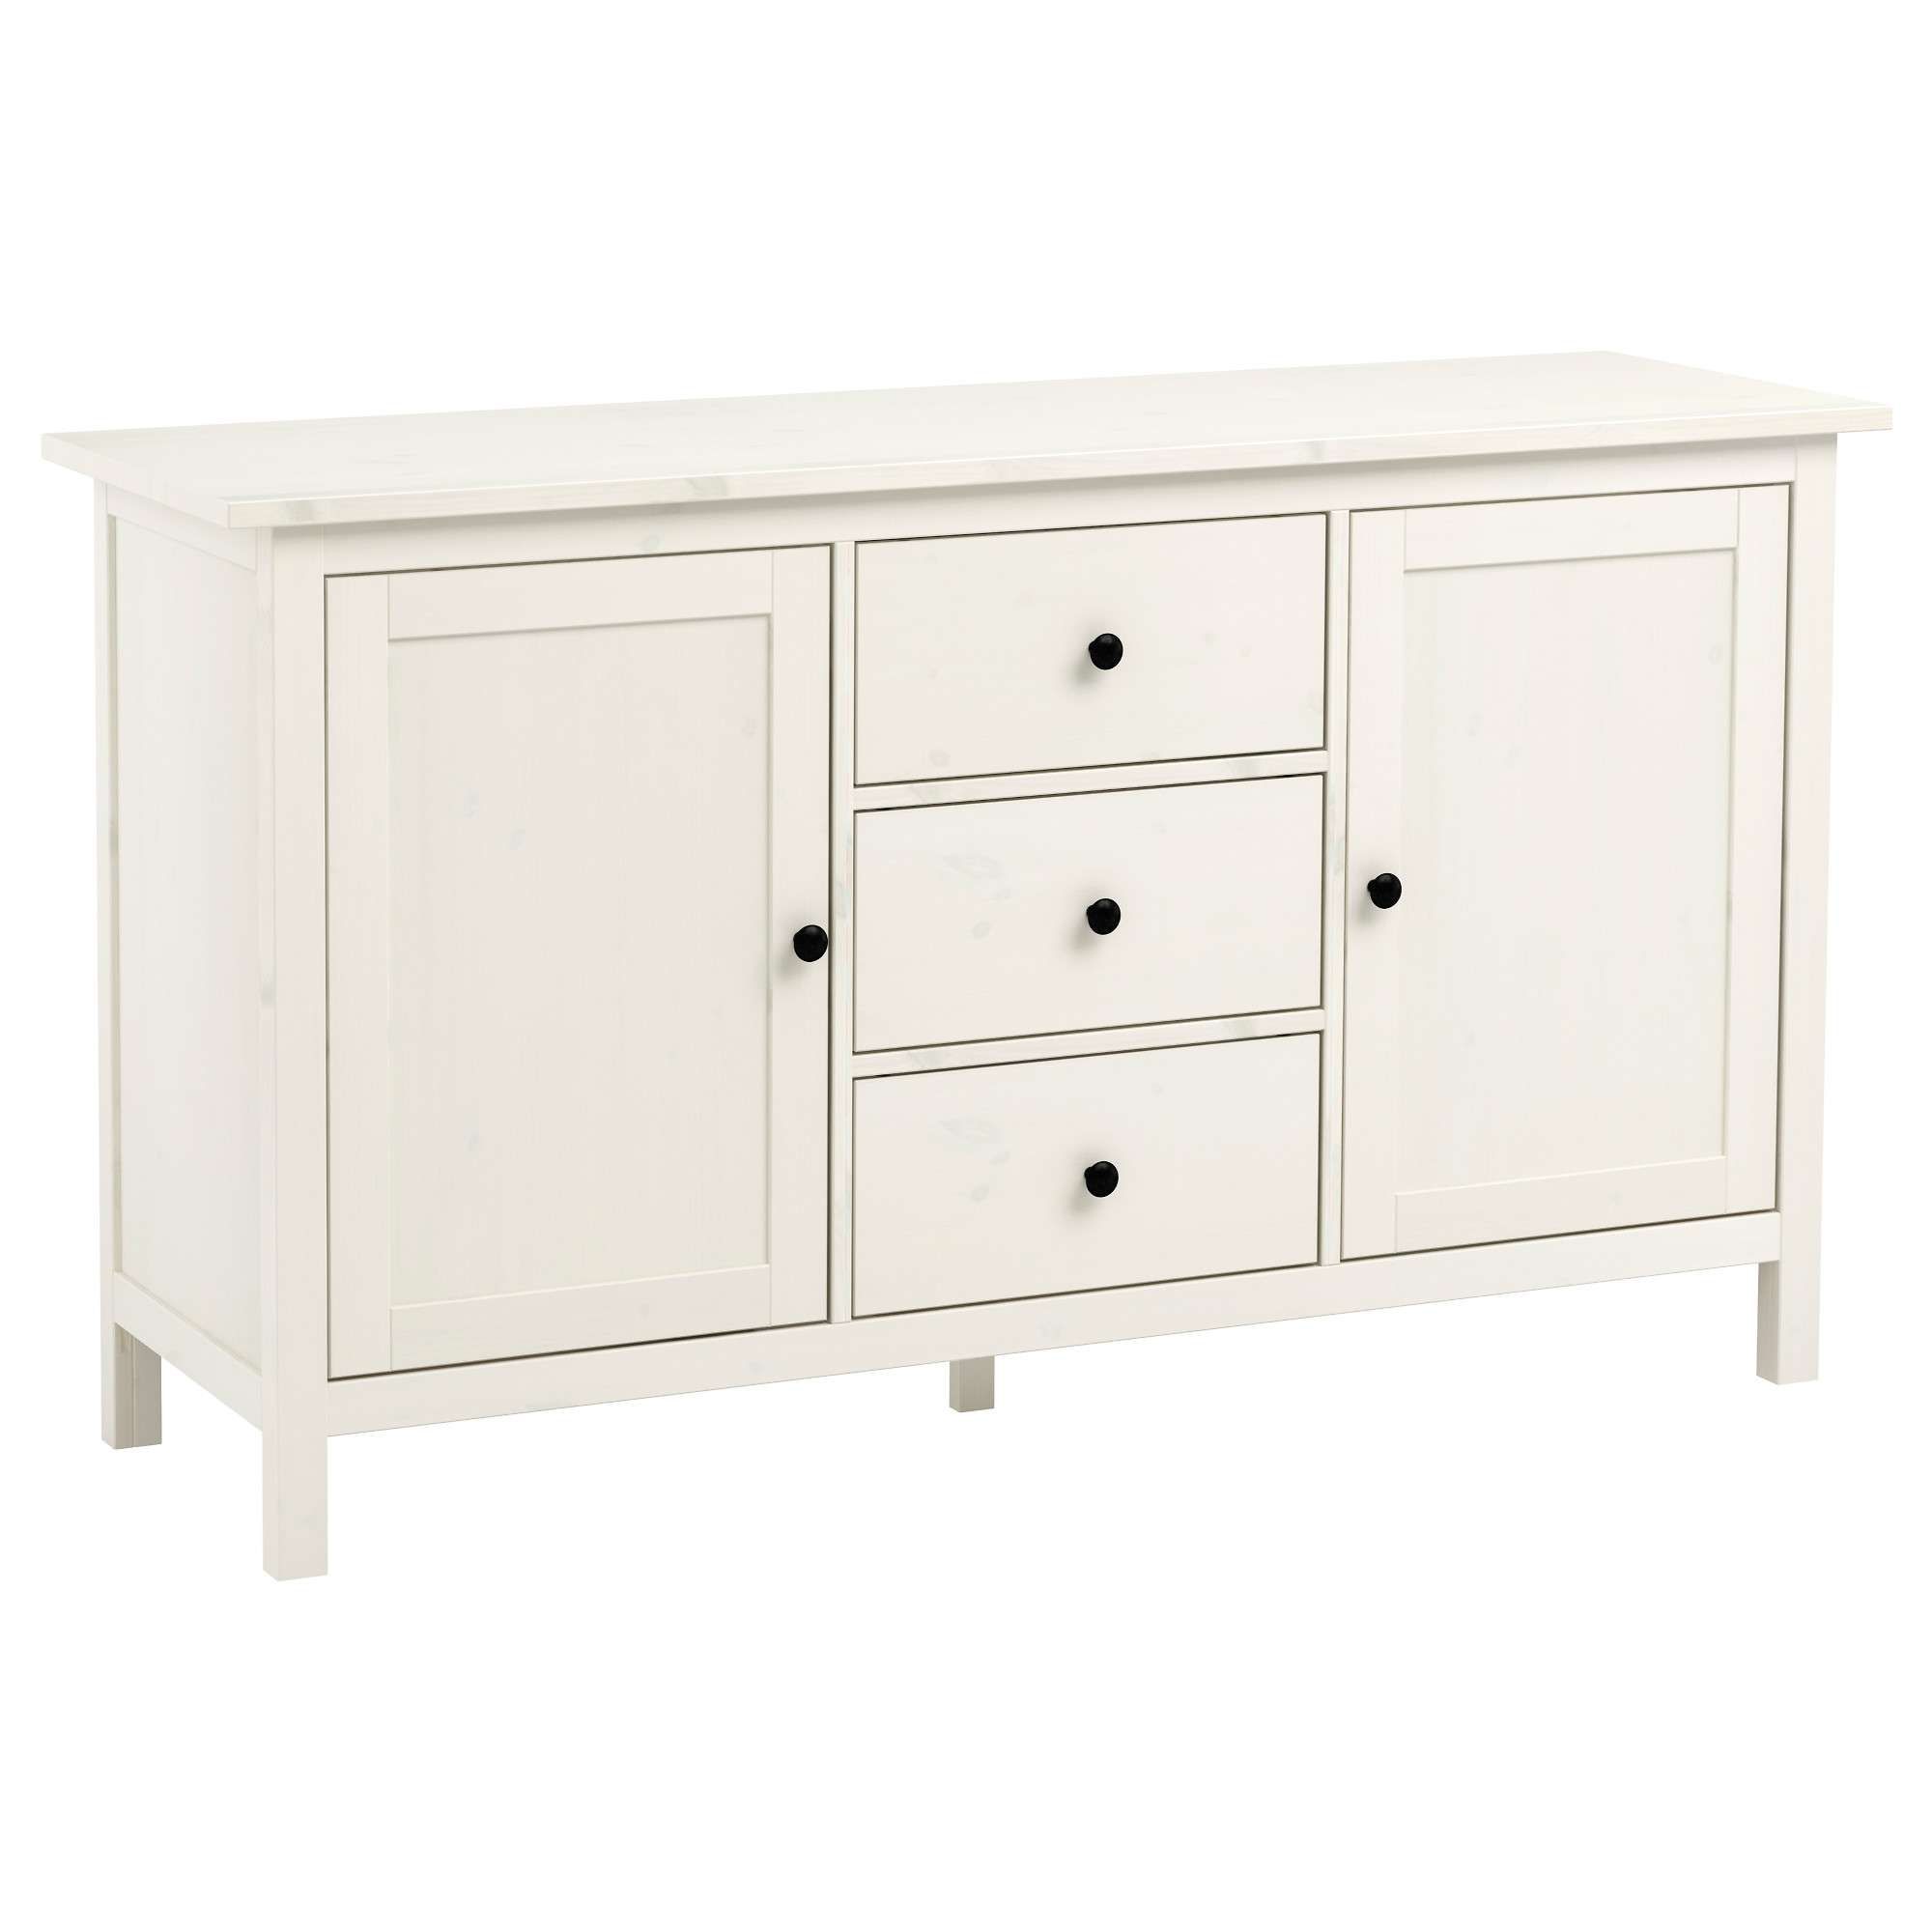 Hemnes Sideboard – White Stain – Ikea With Regard To Sideboards (View 11 of 20)